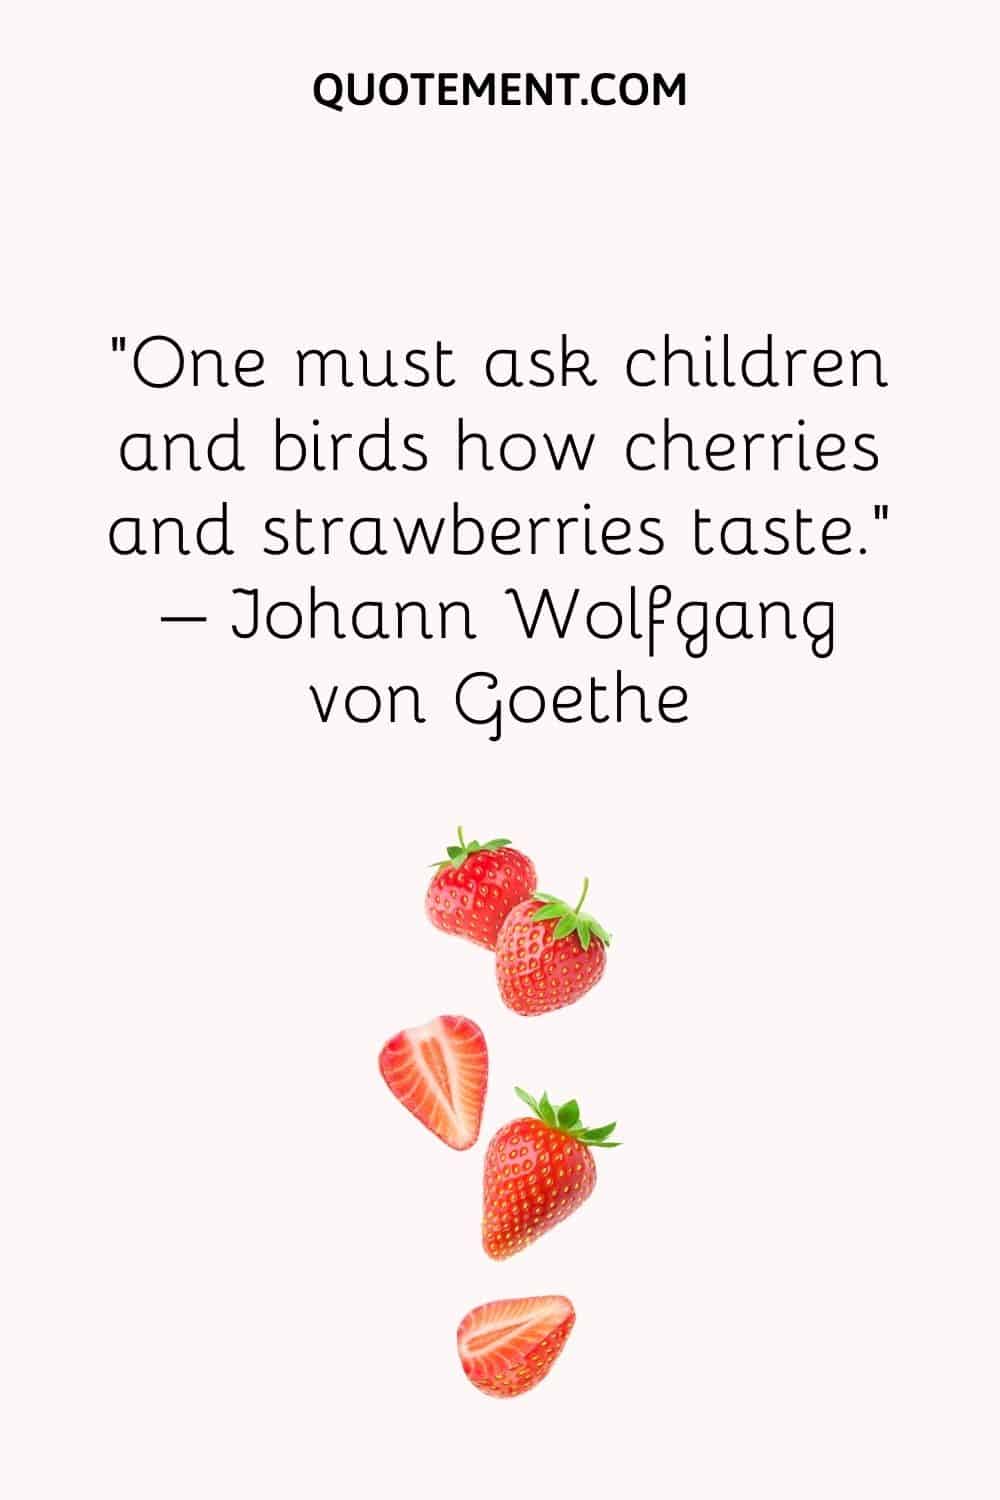 One must ask children and birds how cherries and strawberries taste